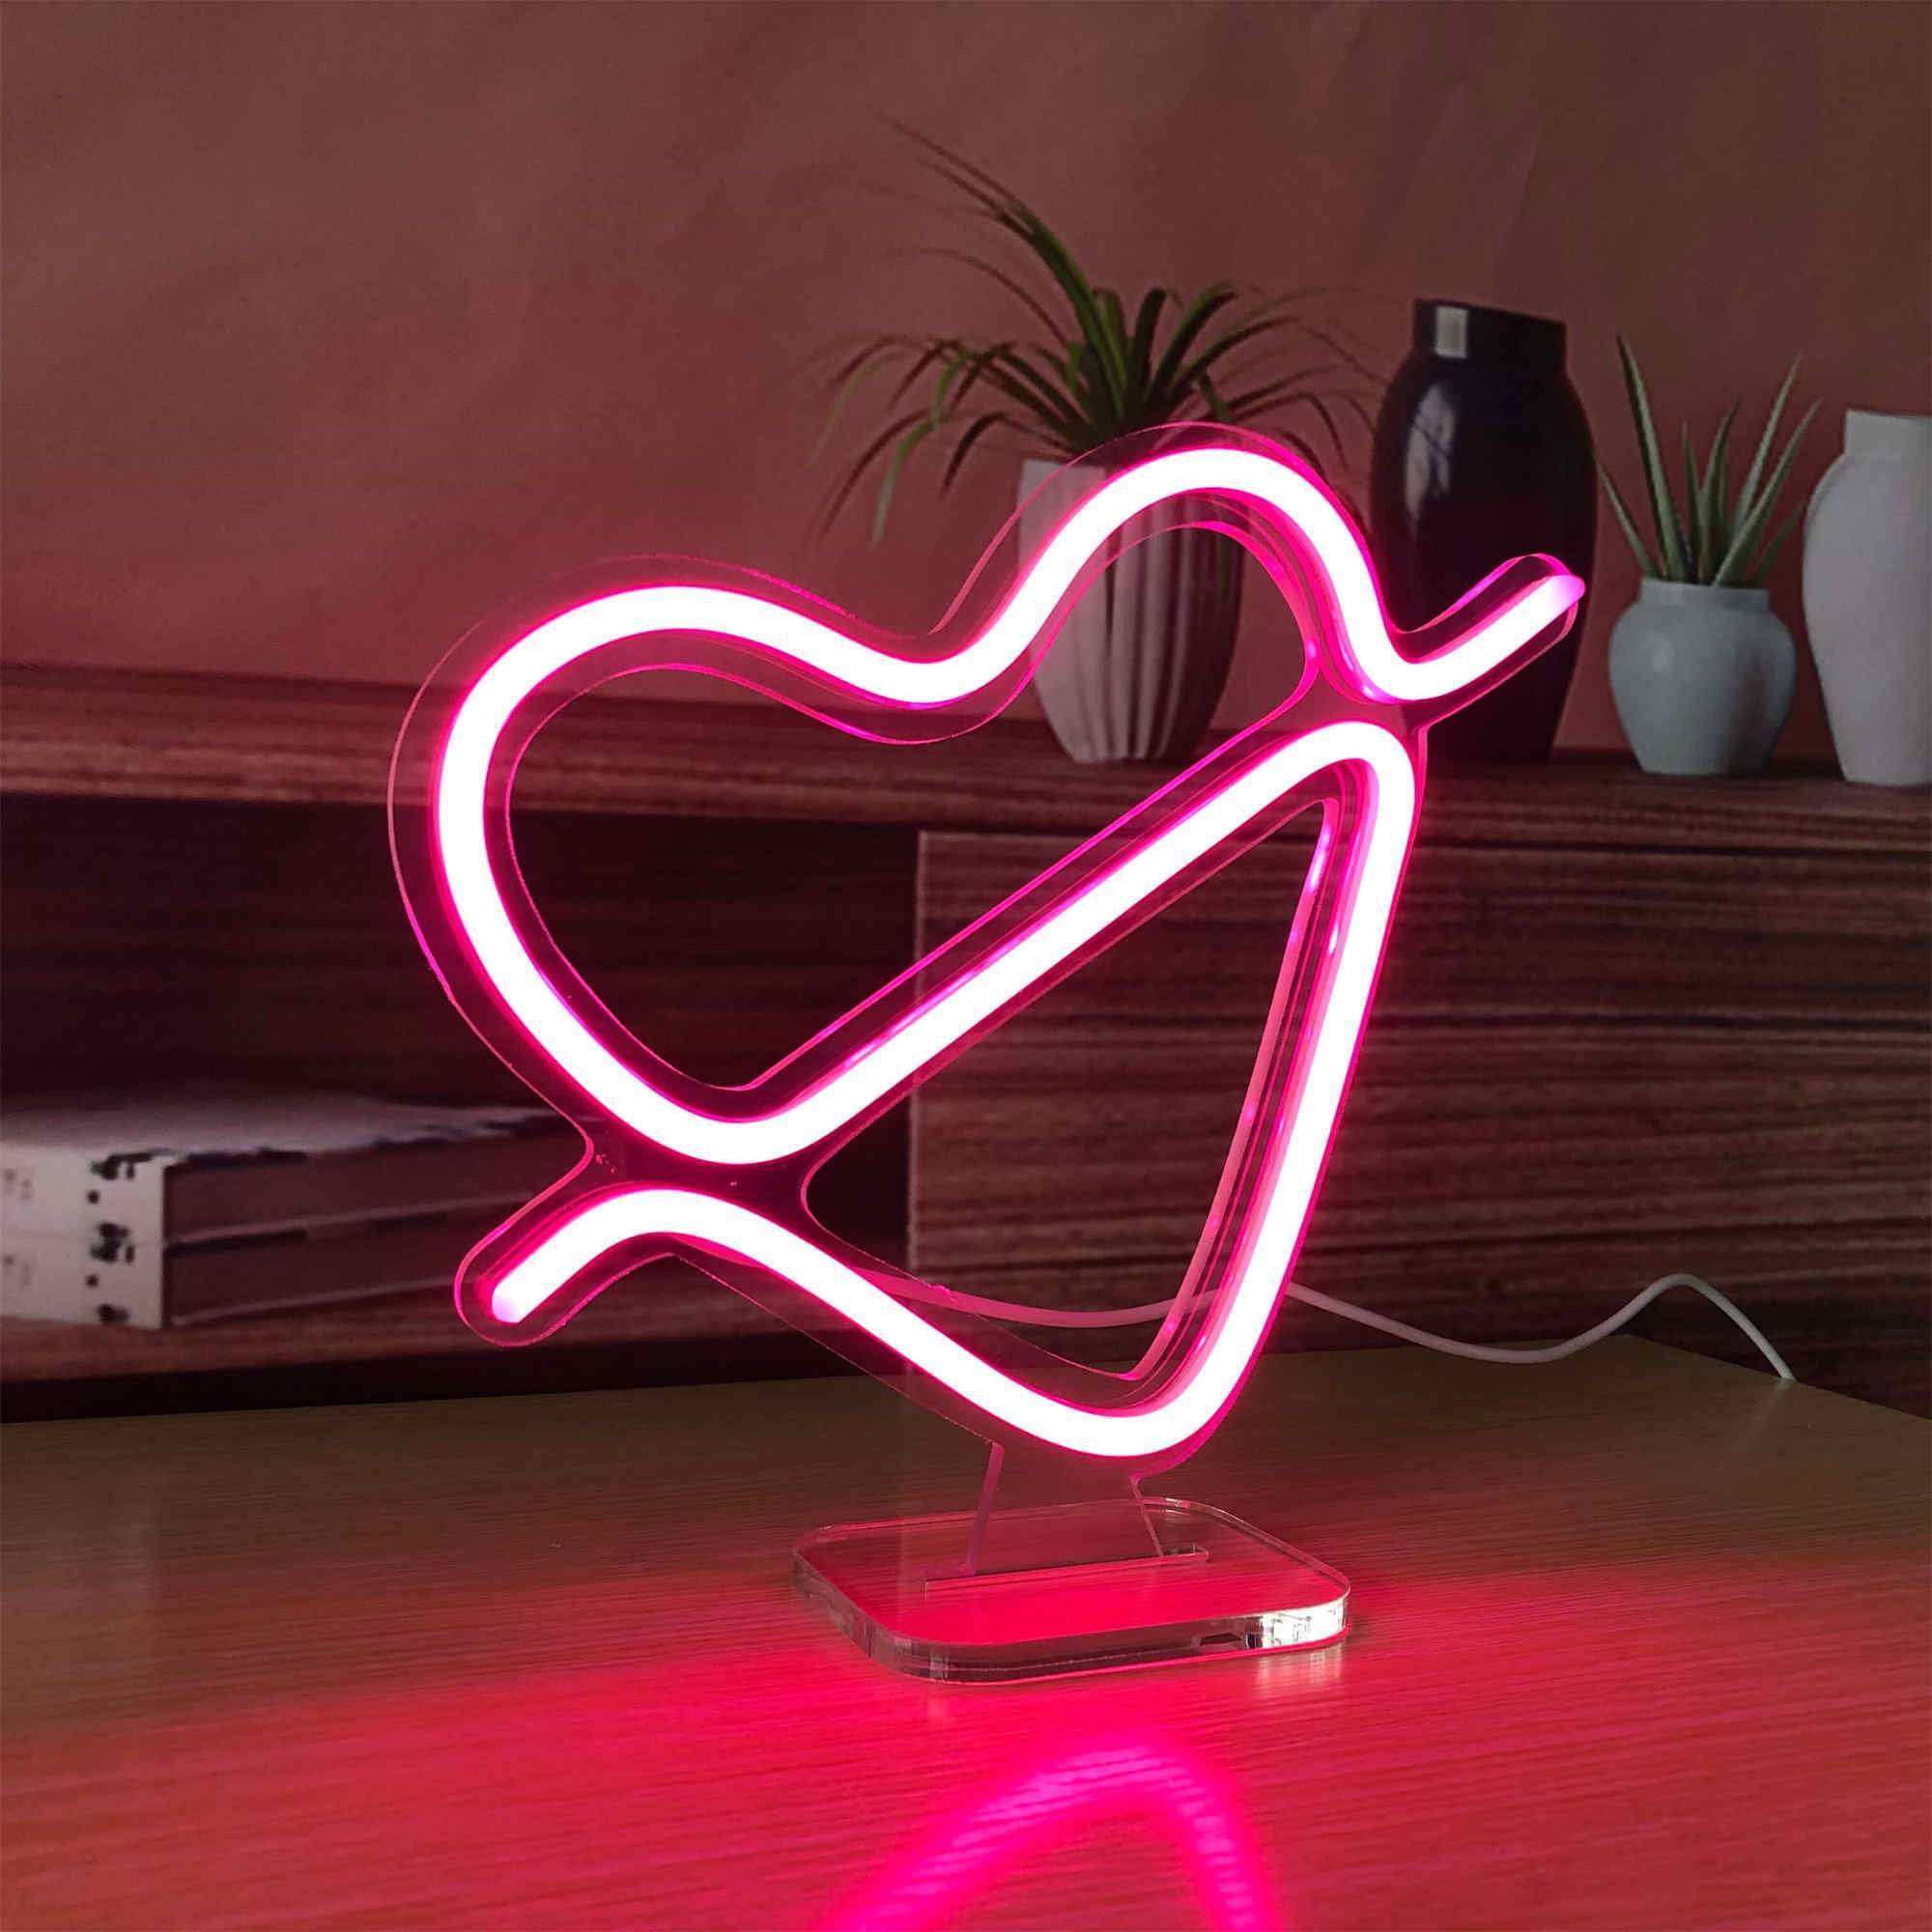 Pierce The Heart With One Arrow Small LED Neon Sign Lights